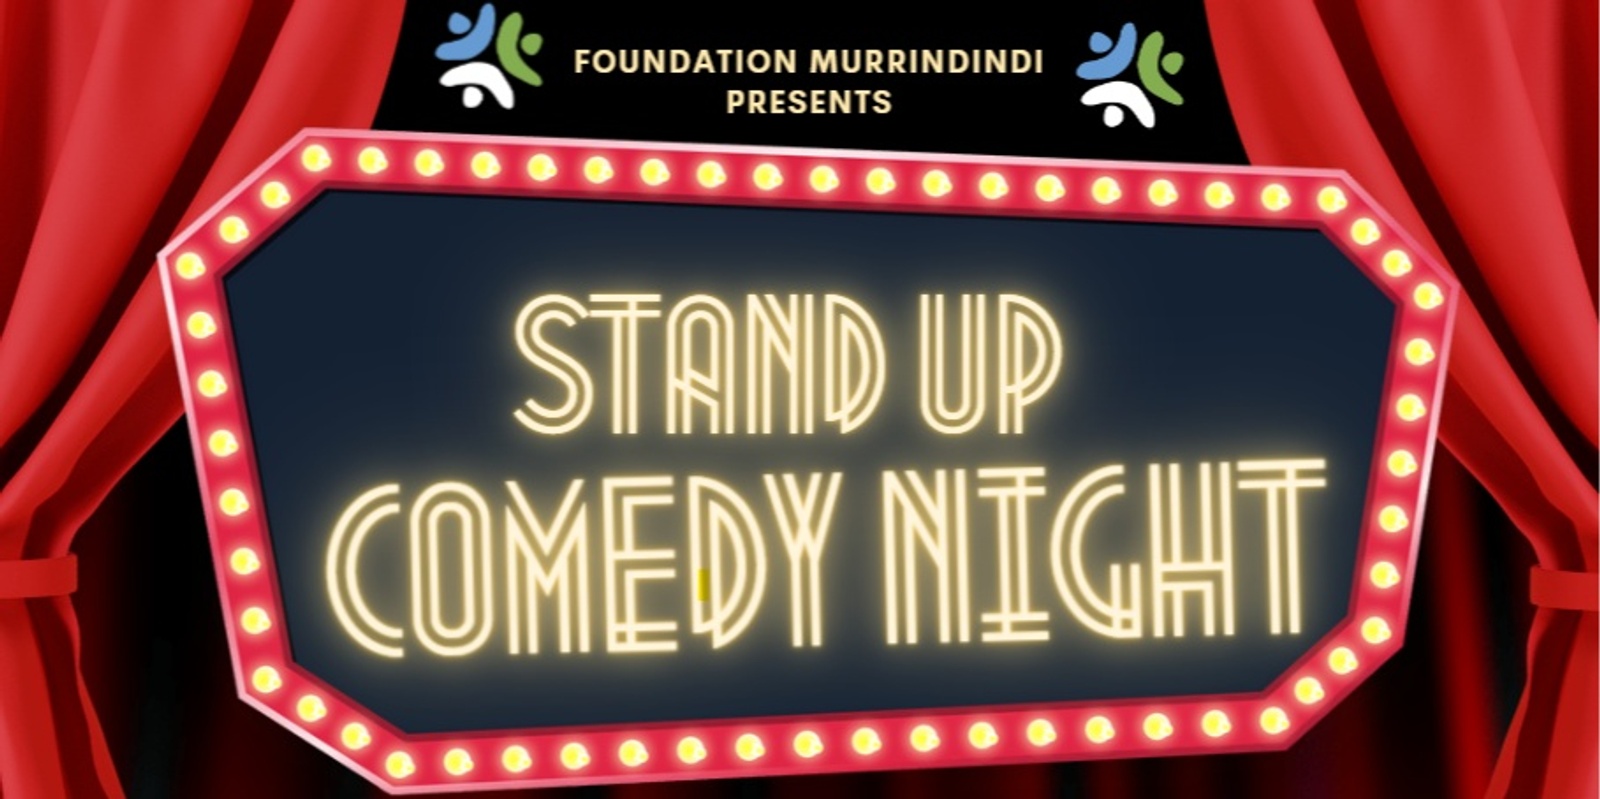 Banner image for Stand Up Comedy Night - Foundation Murrindindi Fundraiser